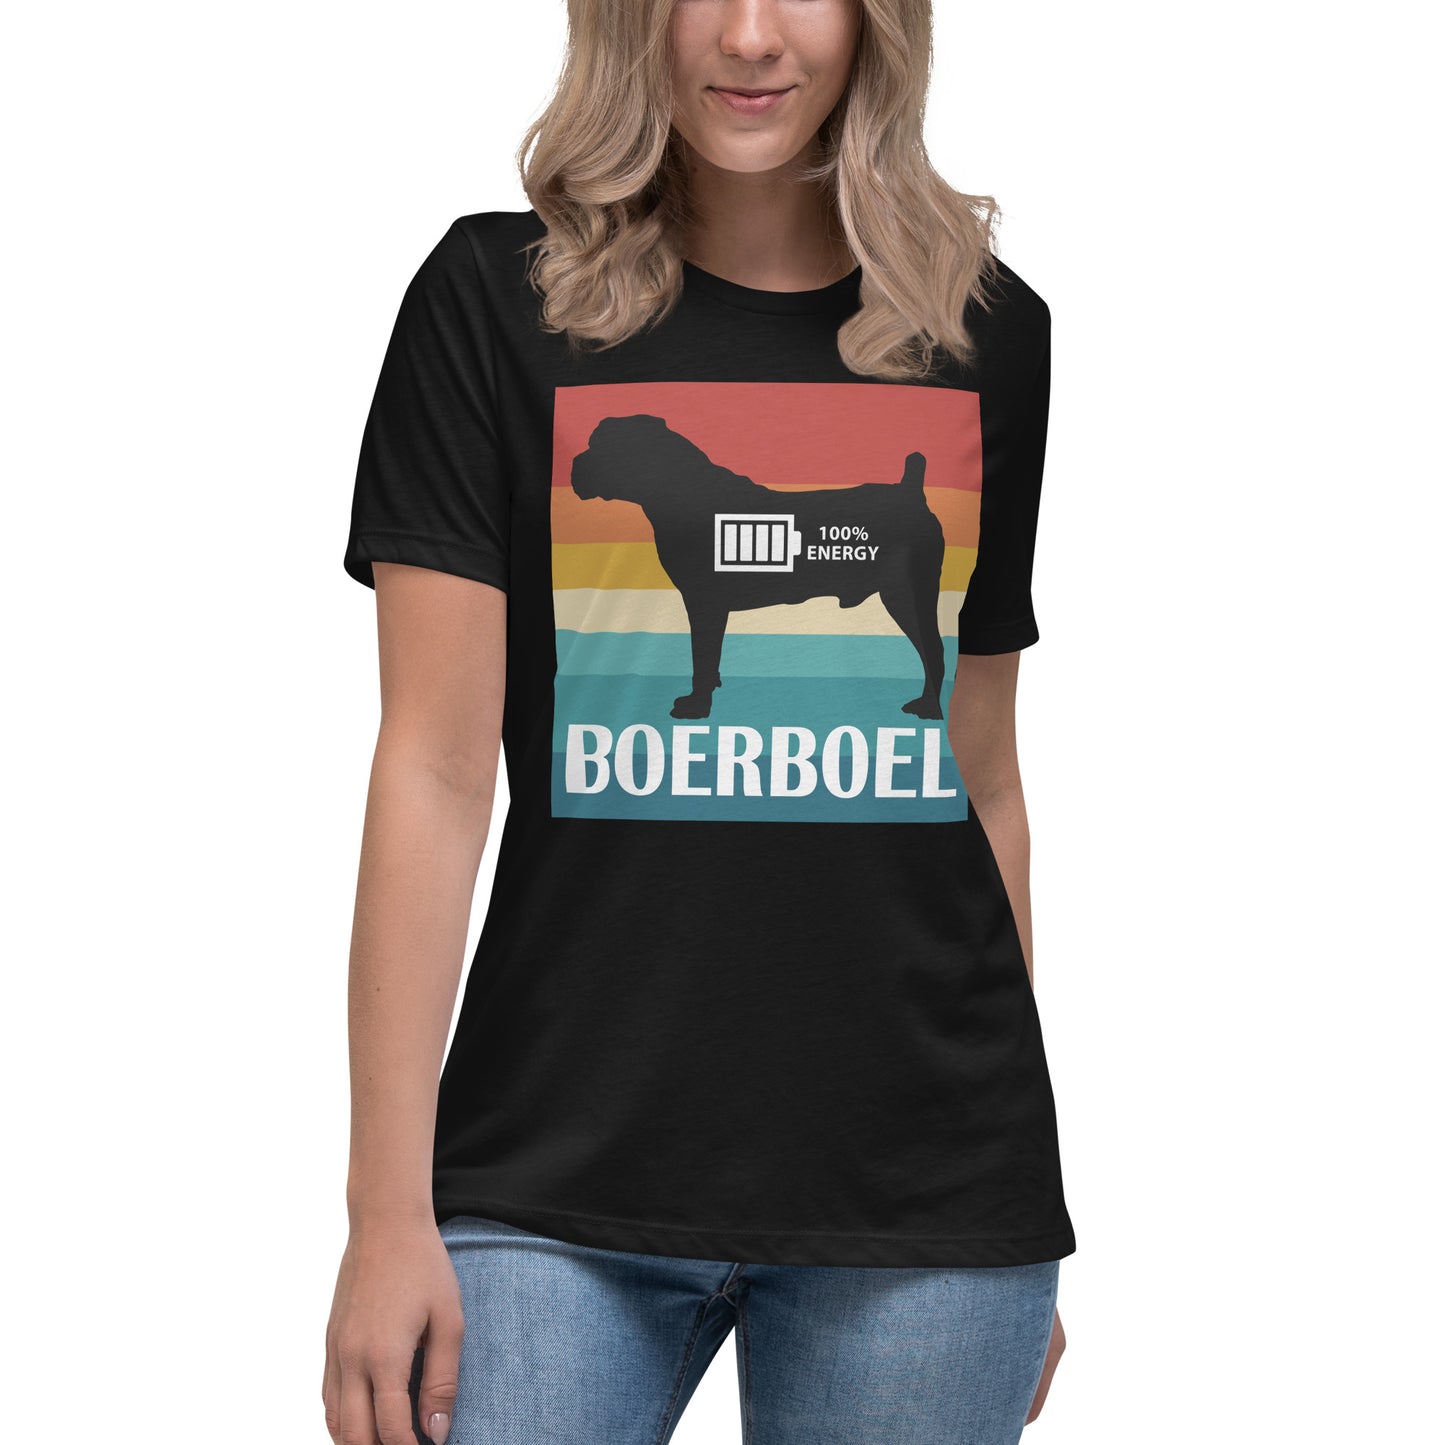 Boerboel 100% Energy Women's Relaxed T-Shirt by Dog Artistry